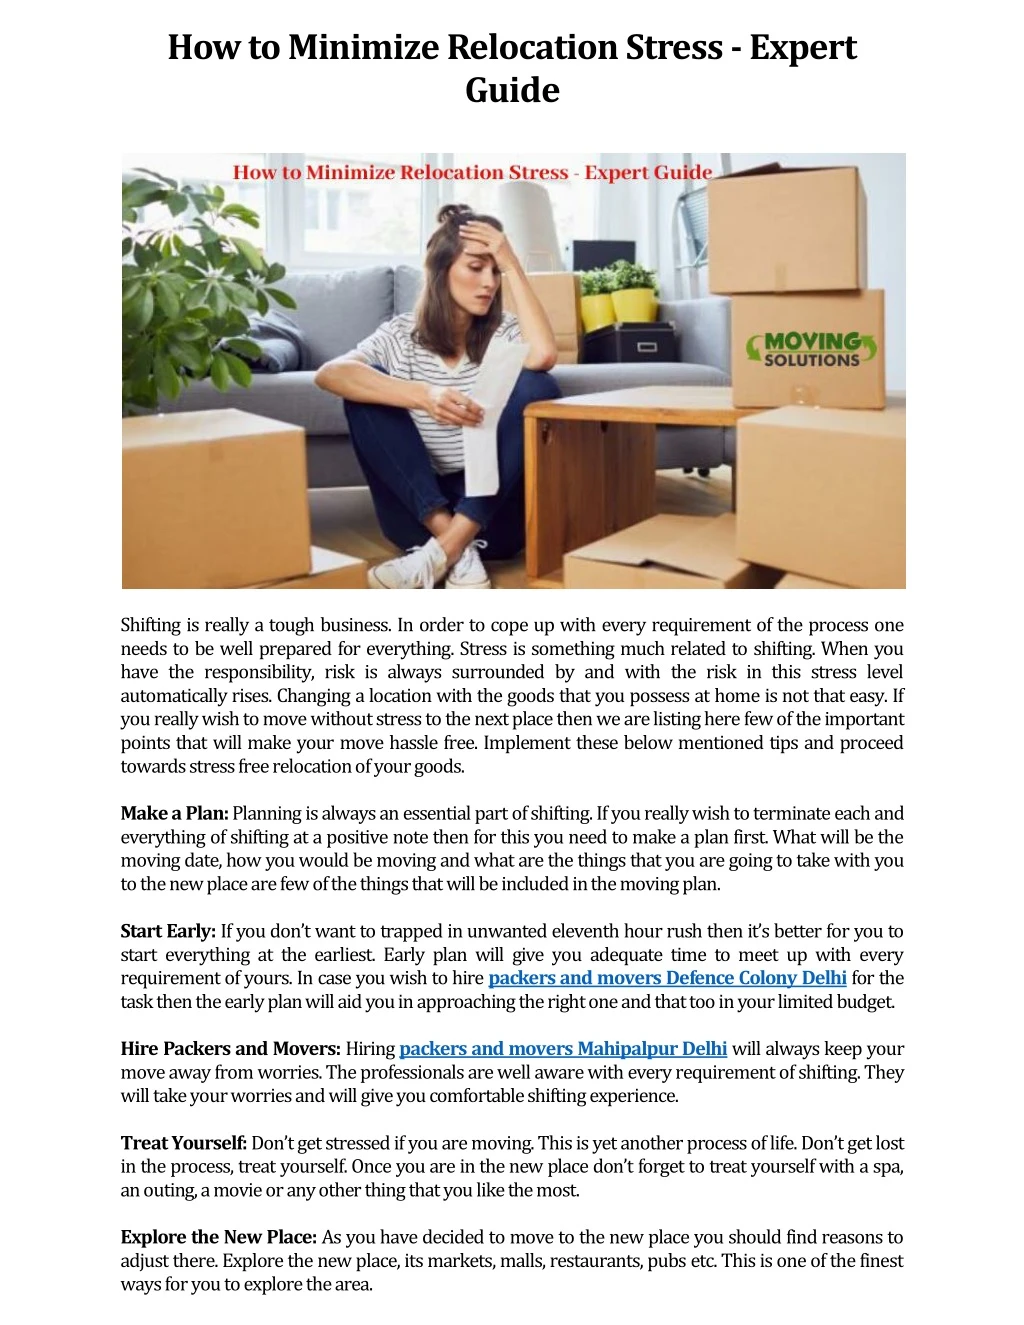 how to minimize relocation stress expert guide